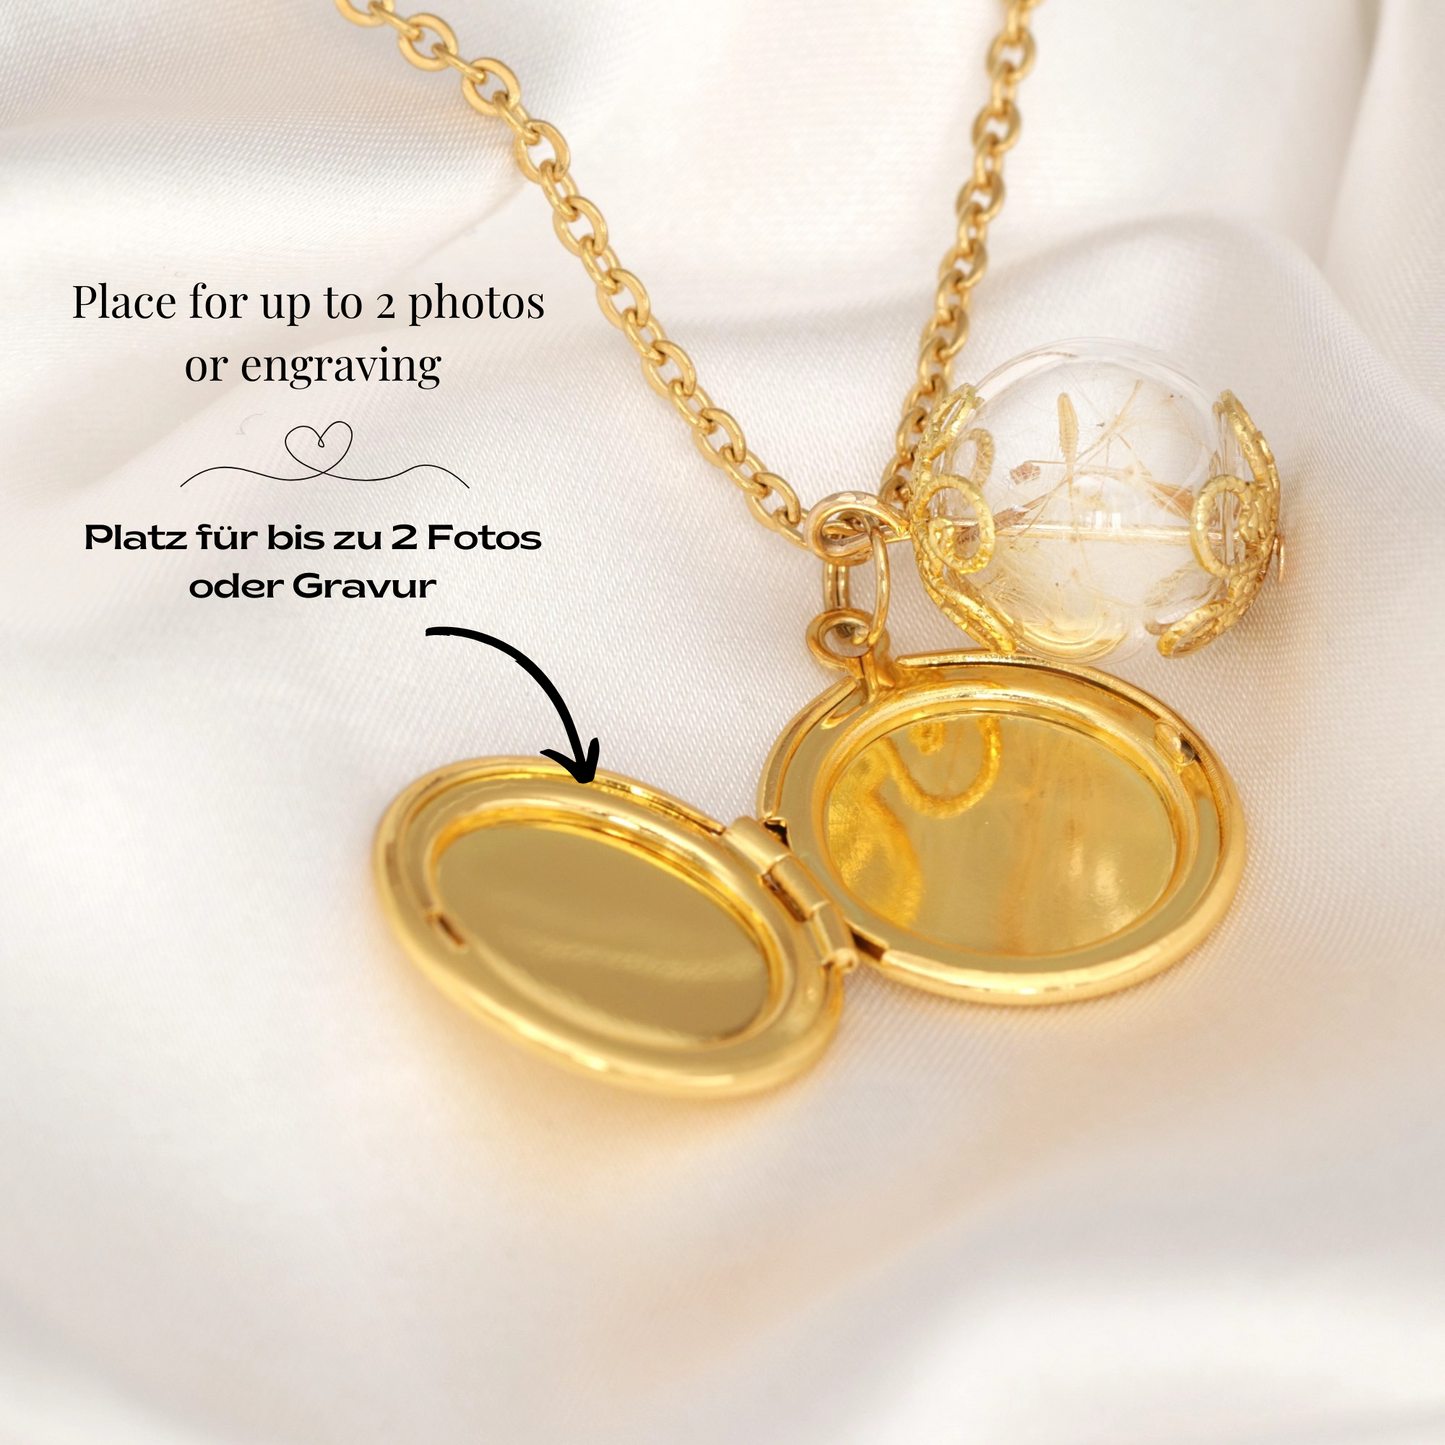 Customizable Pust Flowers Medaillon Chain with Photoservice - Gold Plated - VIK-117